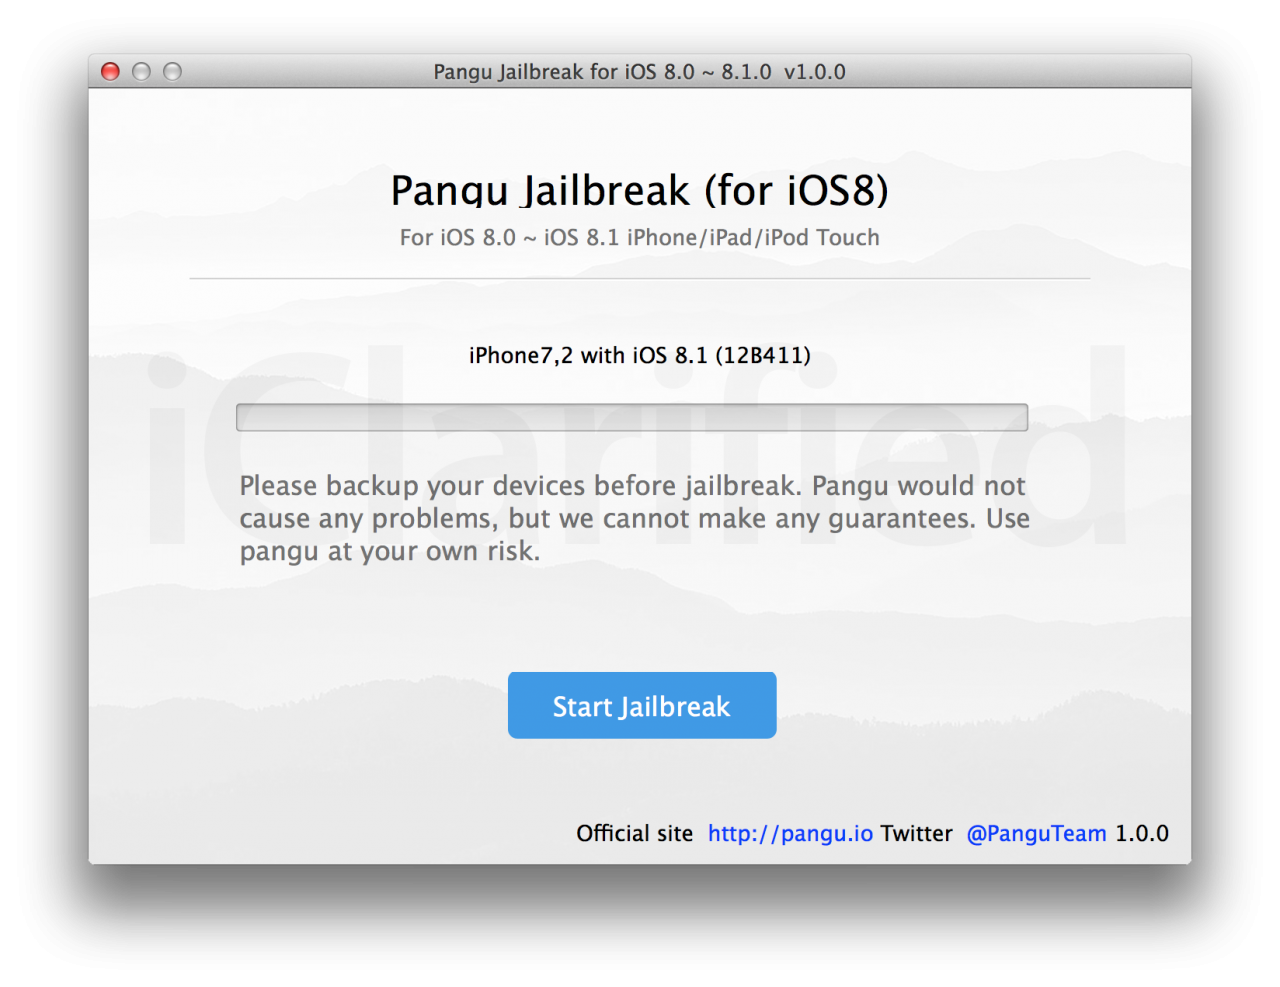 PanGu jailbreak tool, compatible with iOS 8, is now also available for Mac